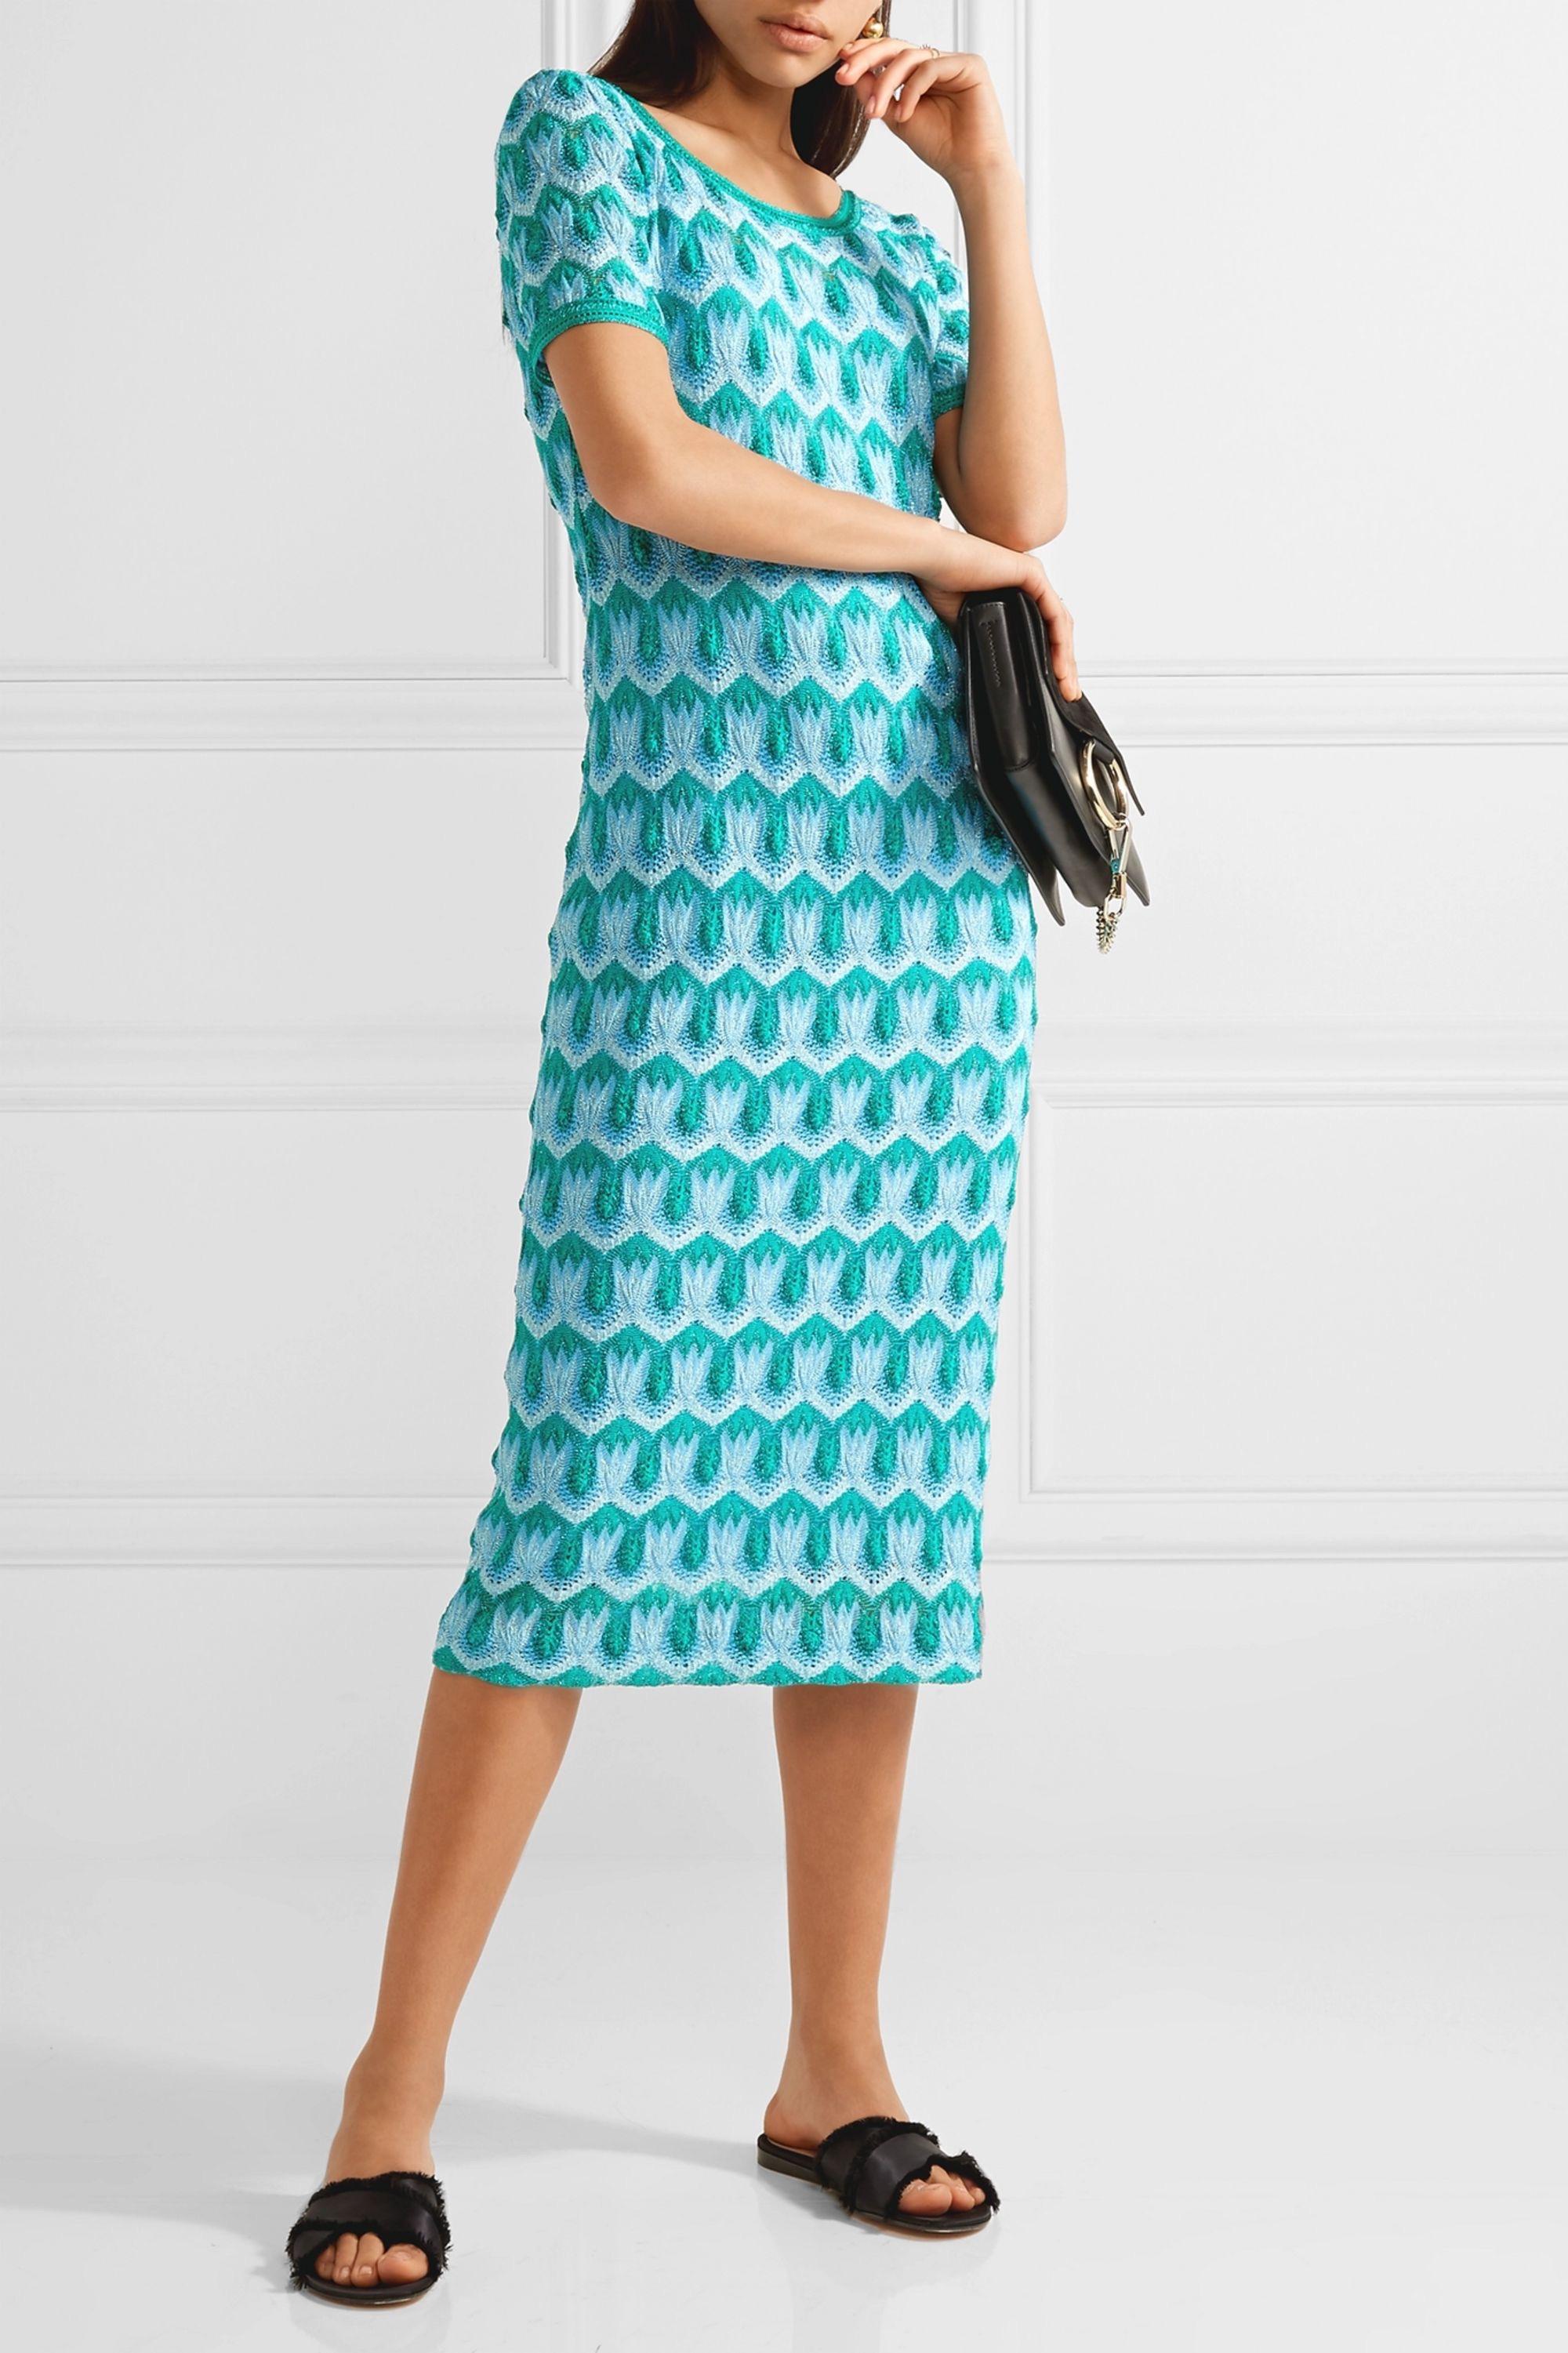 Angela Missoni's tactful approach to color and texture never ceases to amaze season after season. Threaded with metallic yearns, this fitted dress is made from the brand's signature crochet-knit in oceanic hues and lined through the body for